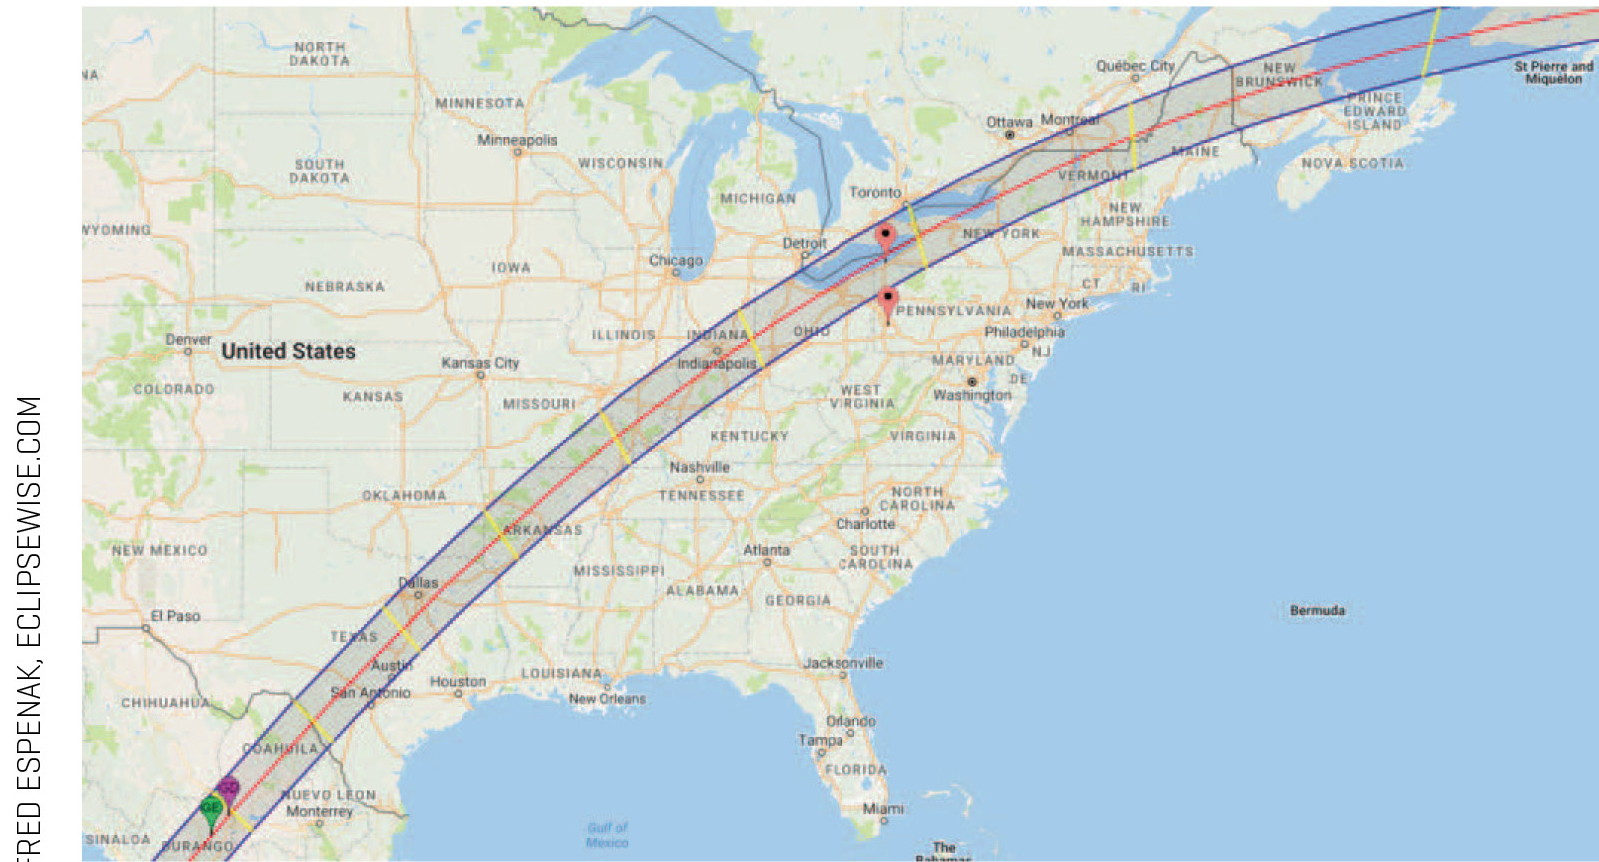 Map showing the path where totality is visible.